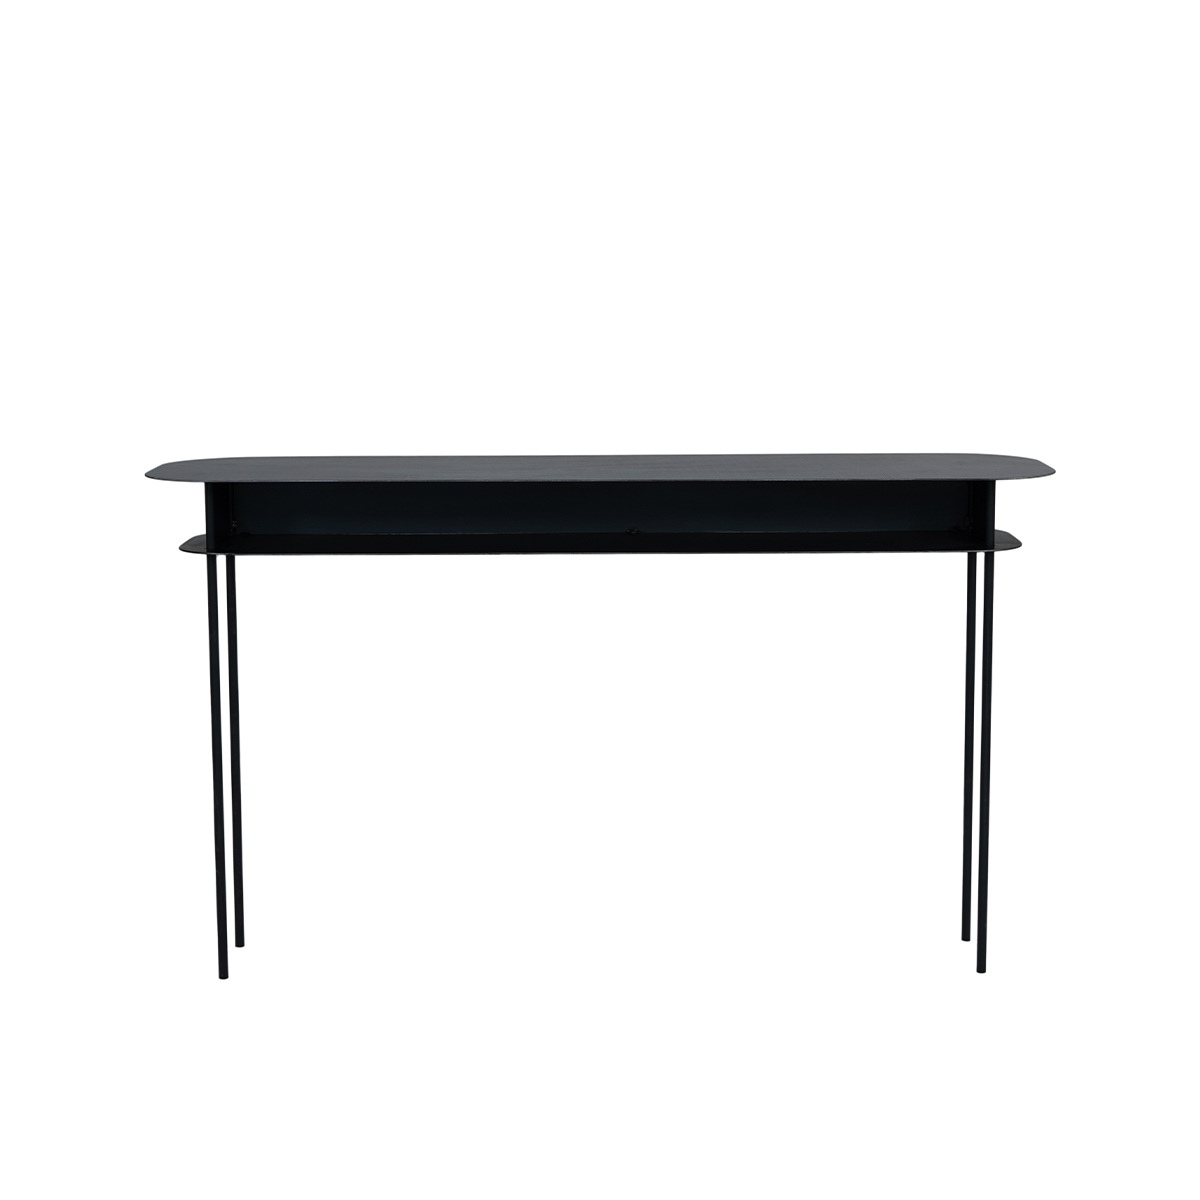 Console Table Tokyo, Black - Different sizes - Waxed steel - image 1